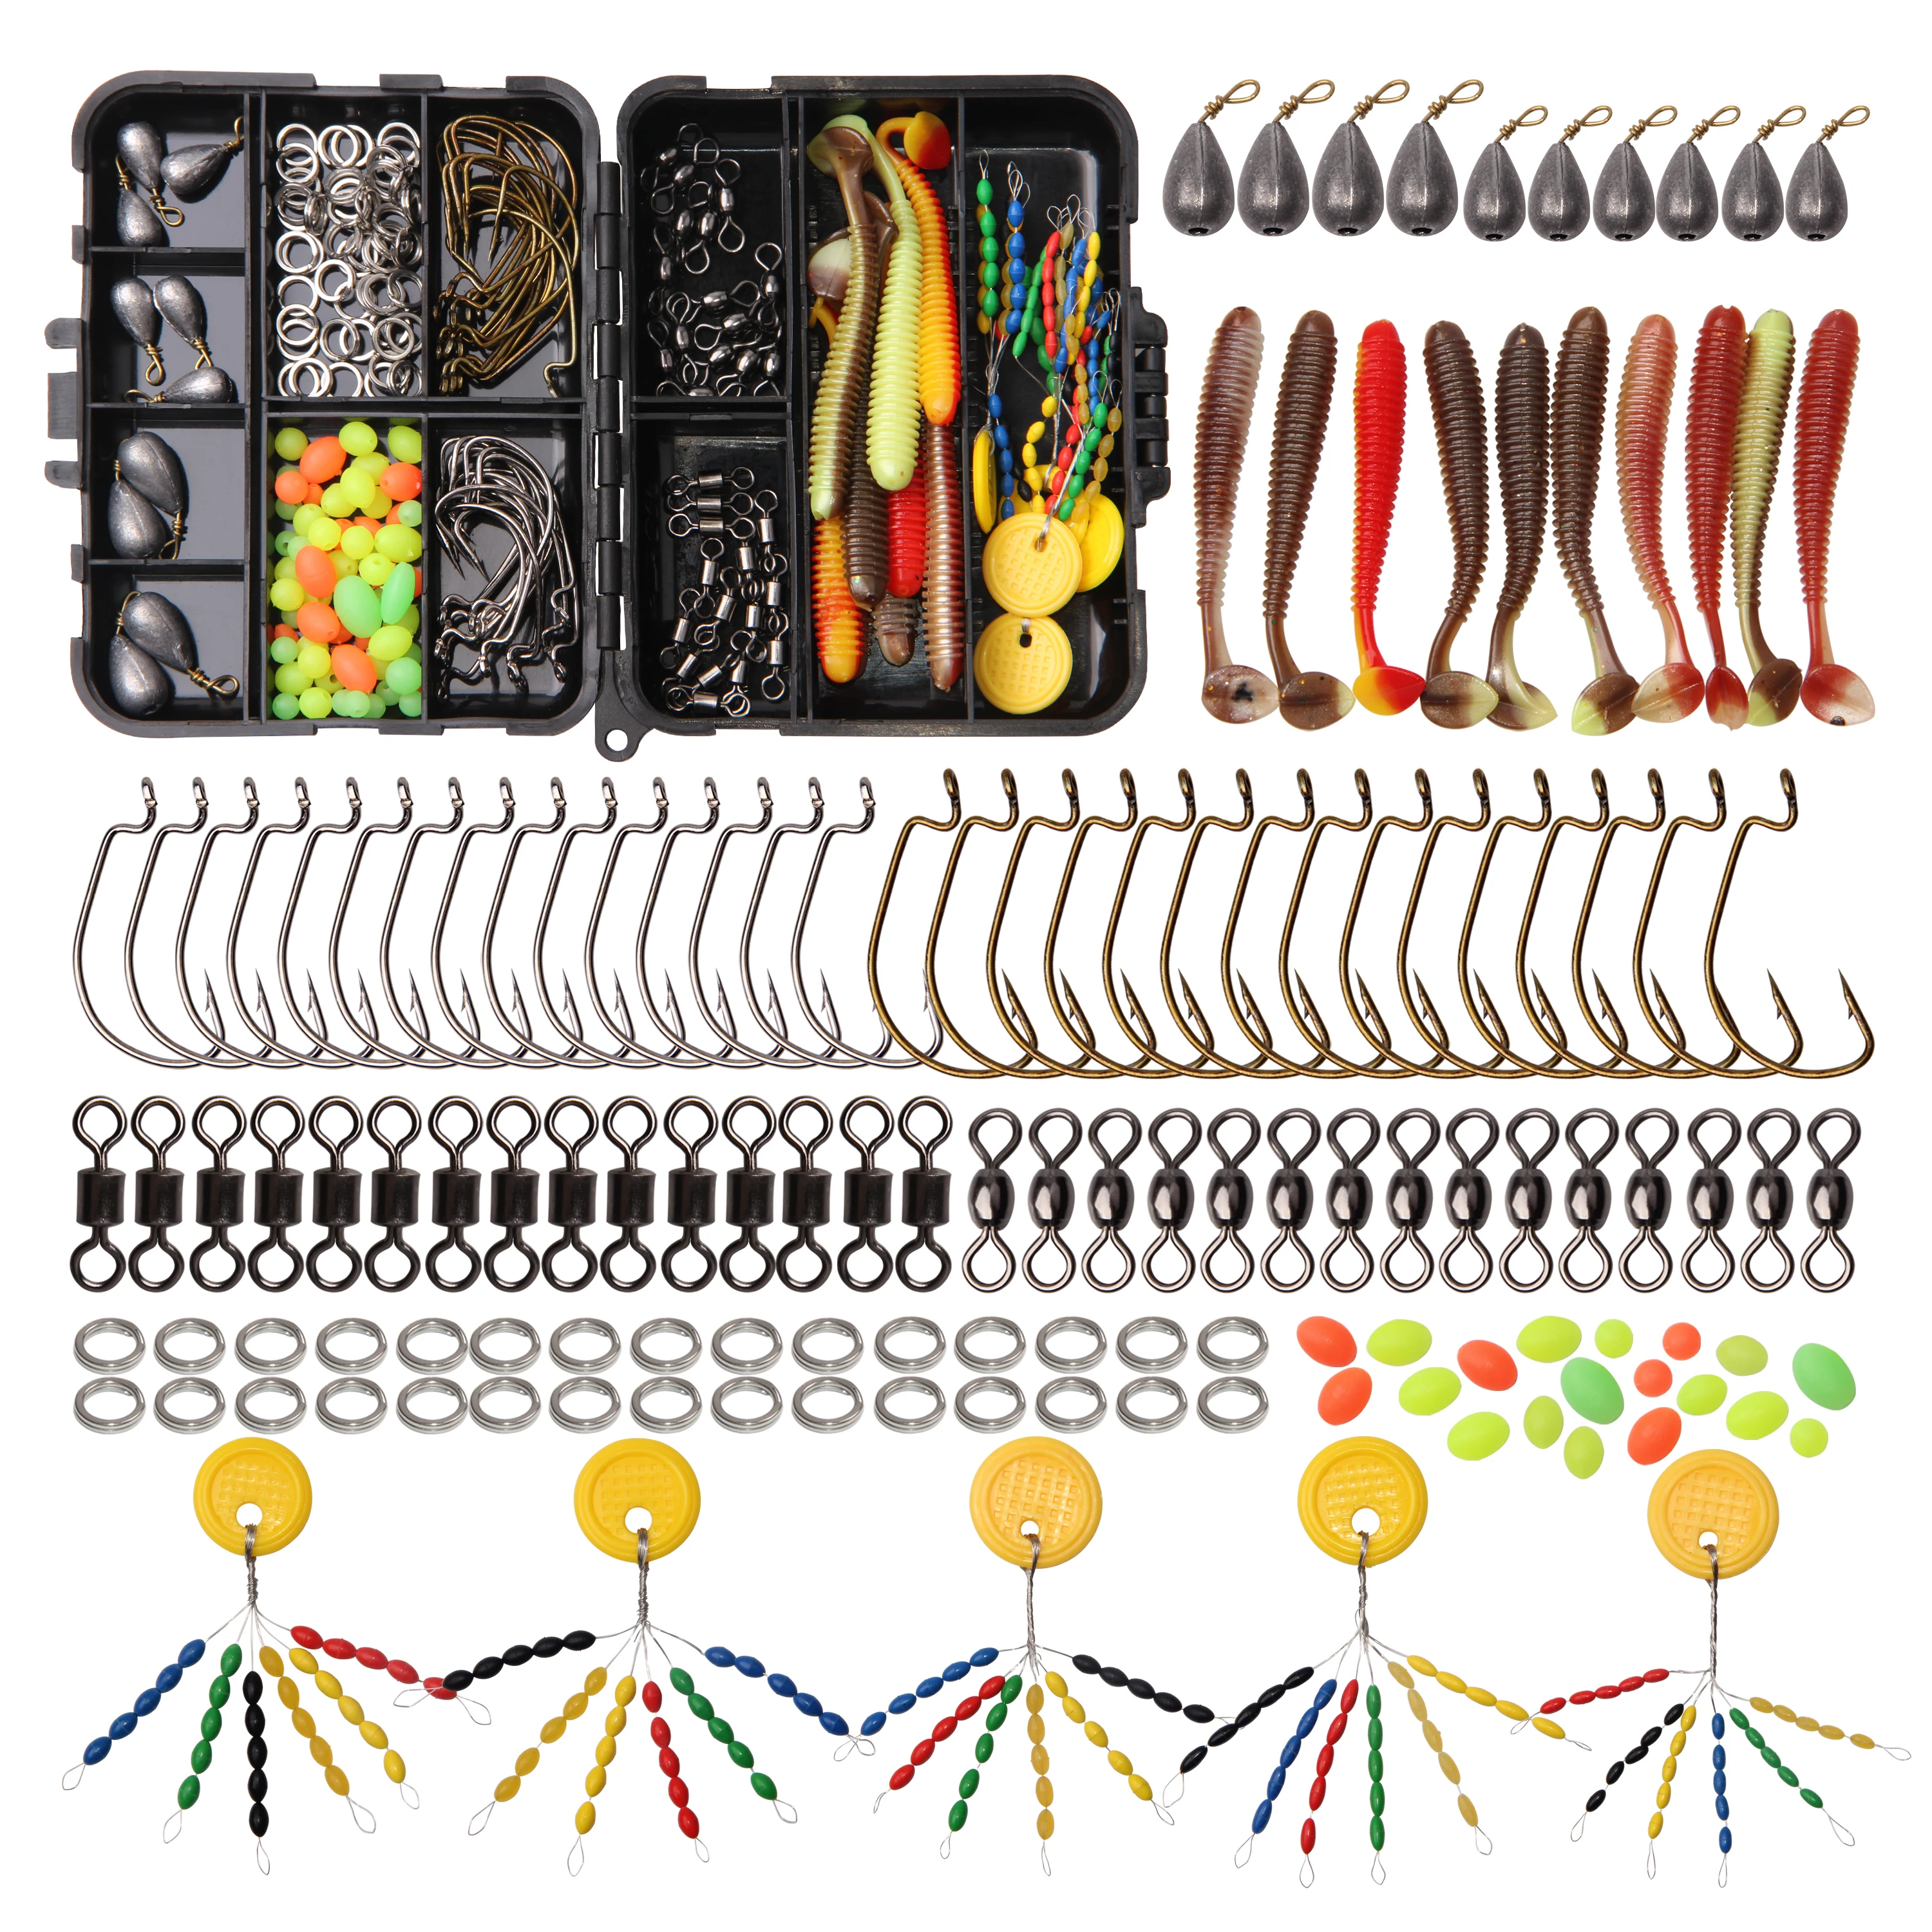 

Wholesale 155pcs Fishing Hooks Swivel Snap Space Bea Soft Lures Fishing Sinker Weights Tackle Box Set, Mixed colors